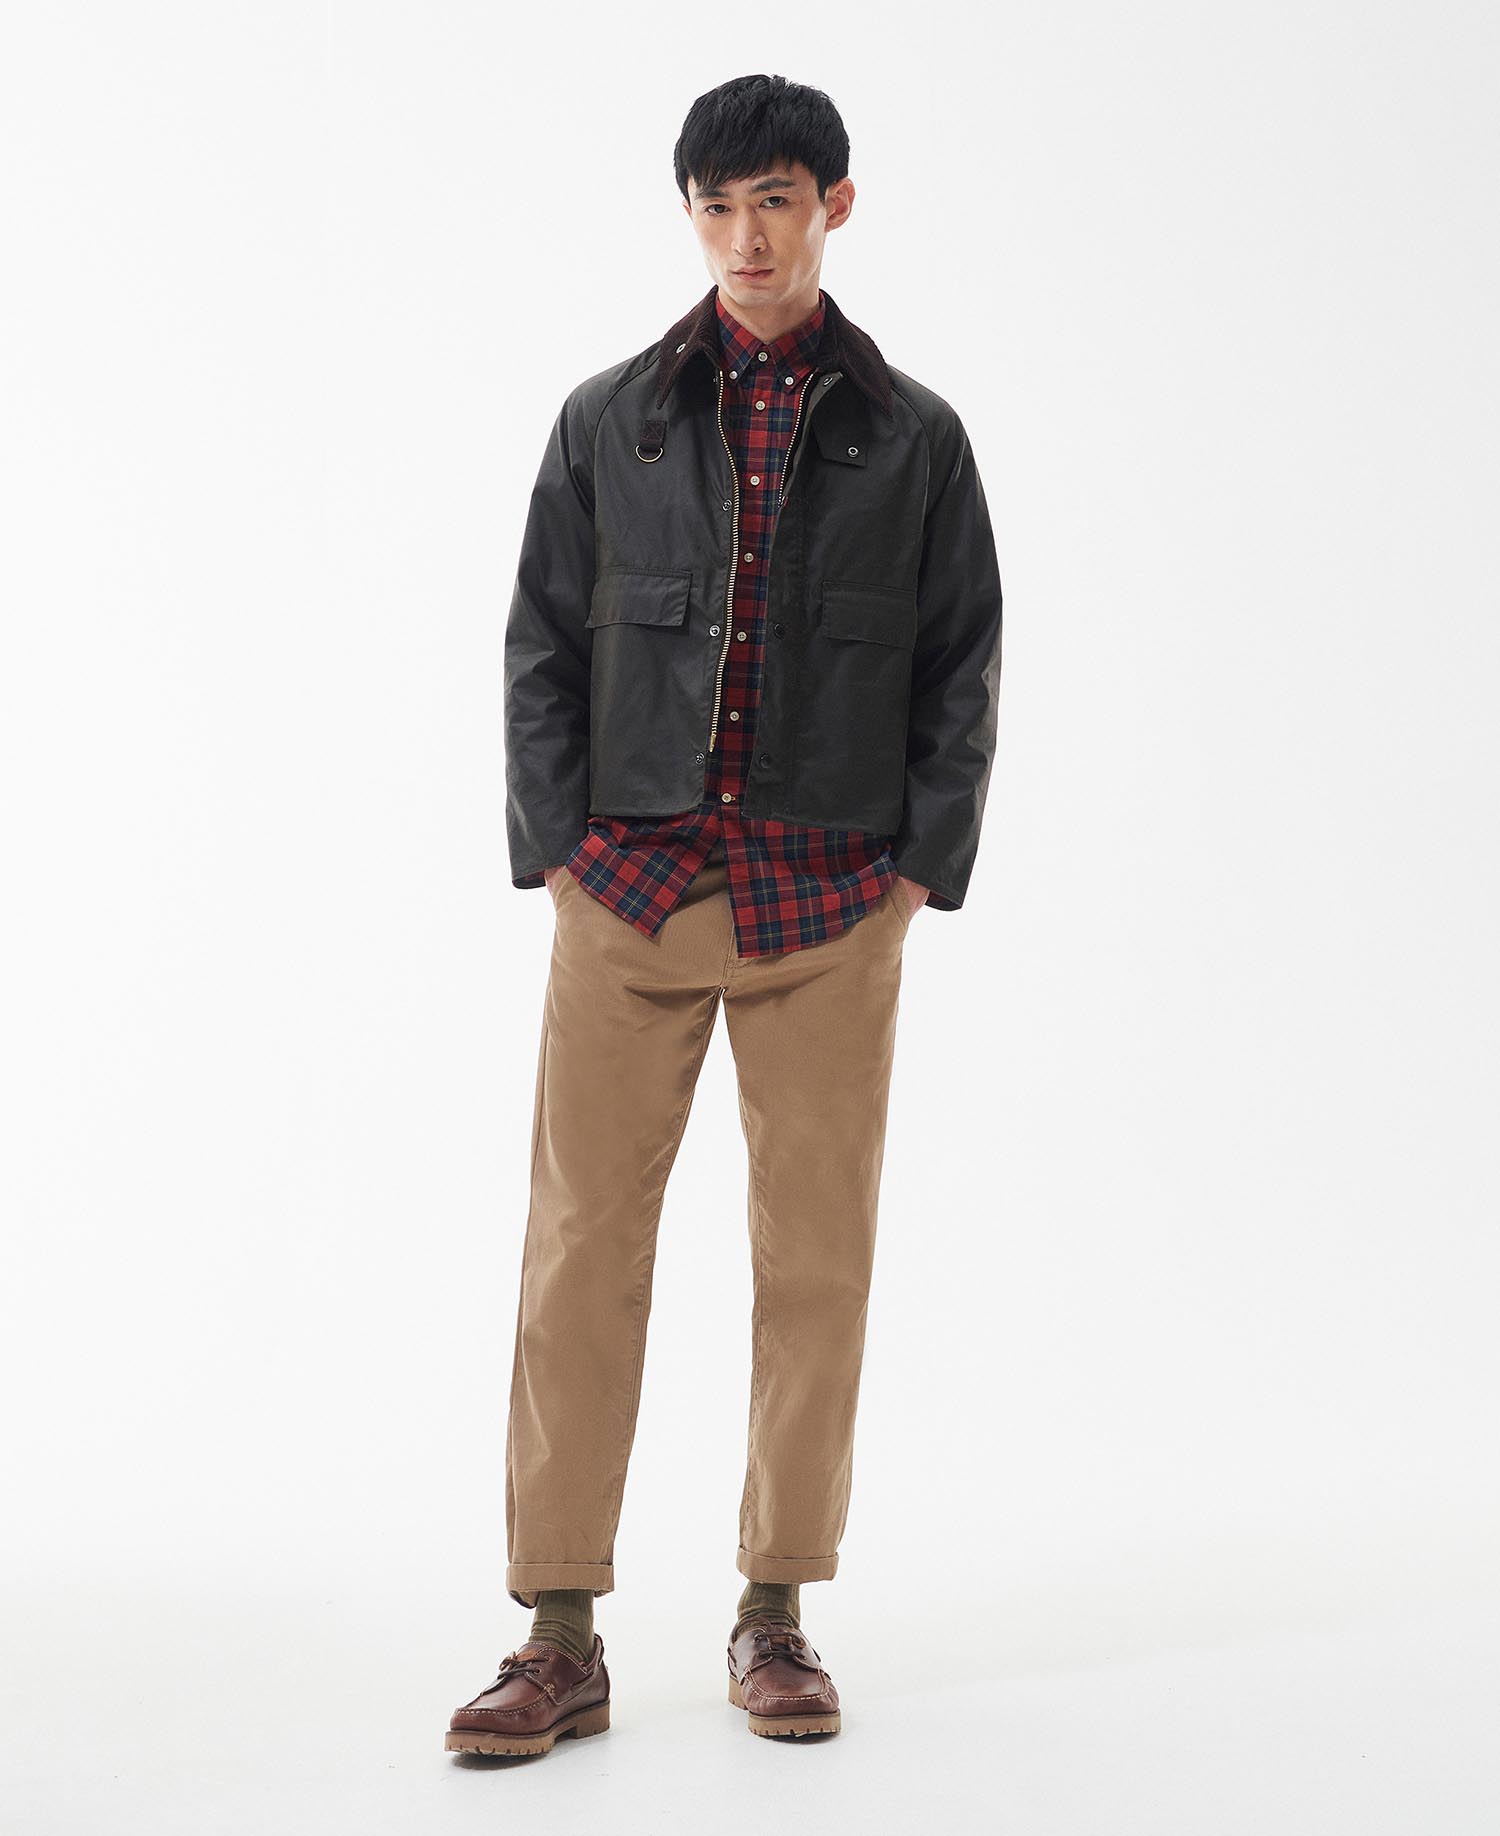 Shop the Barbour Lunar Spey Wax Jacket today. | Barbour